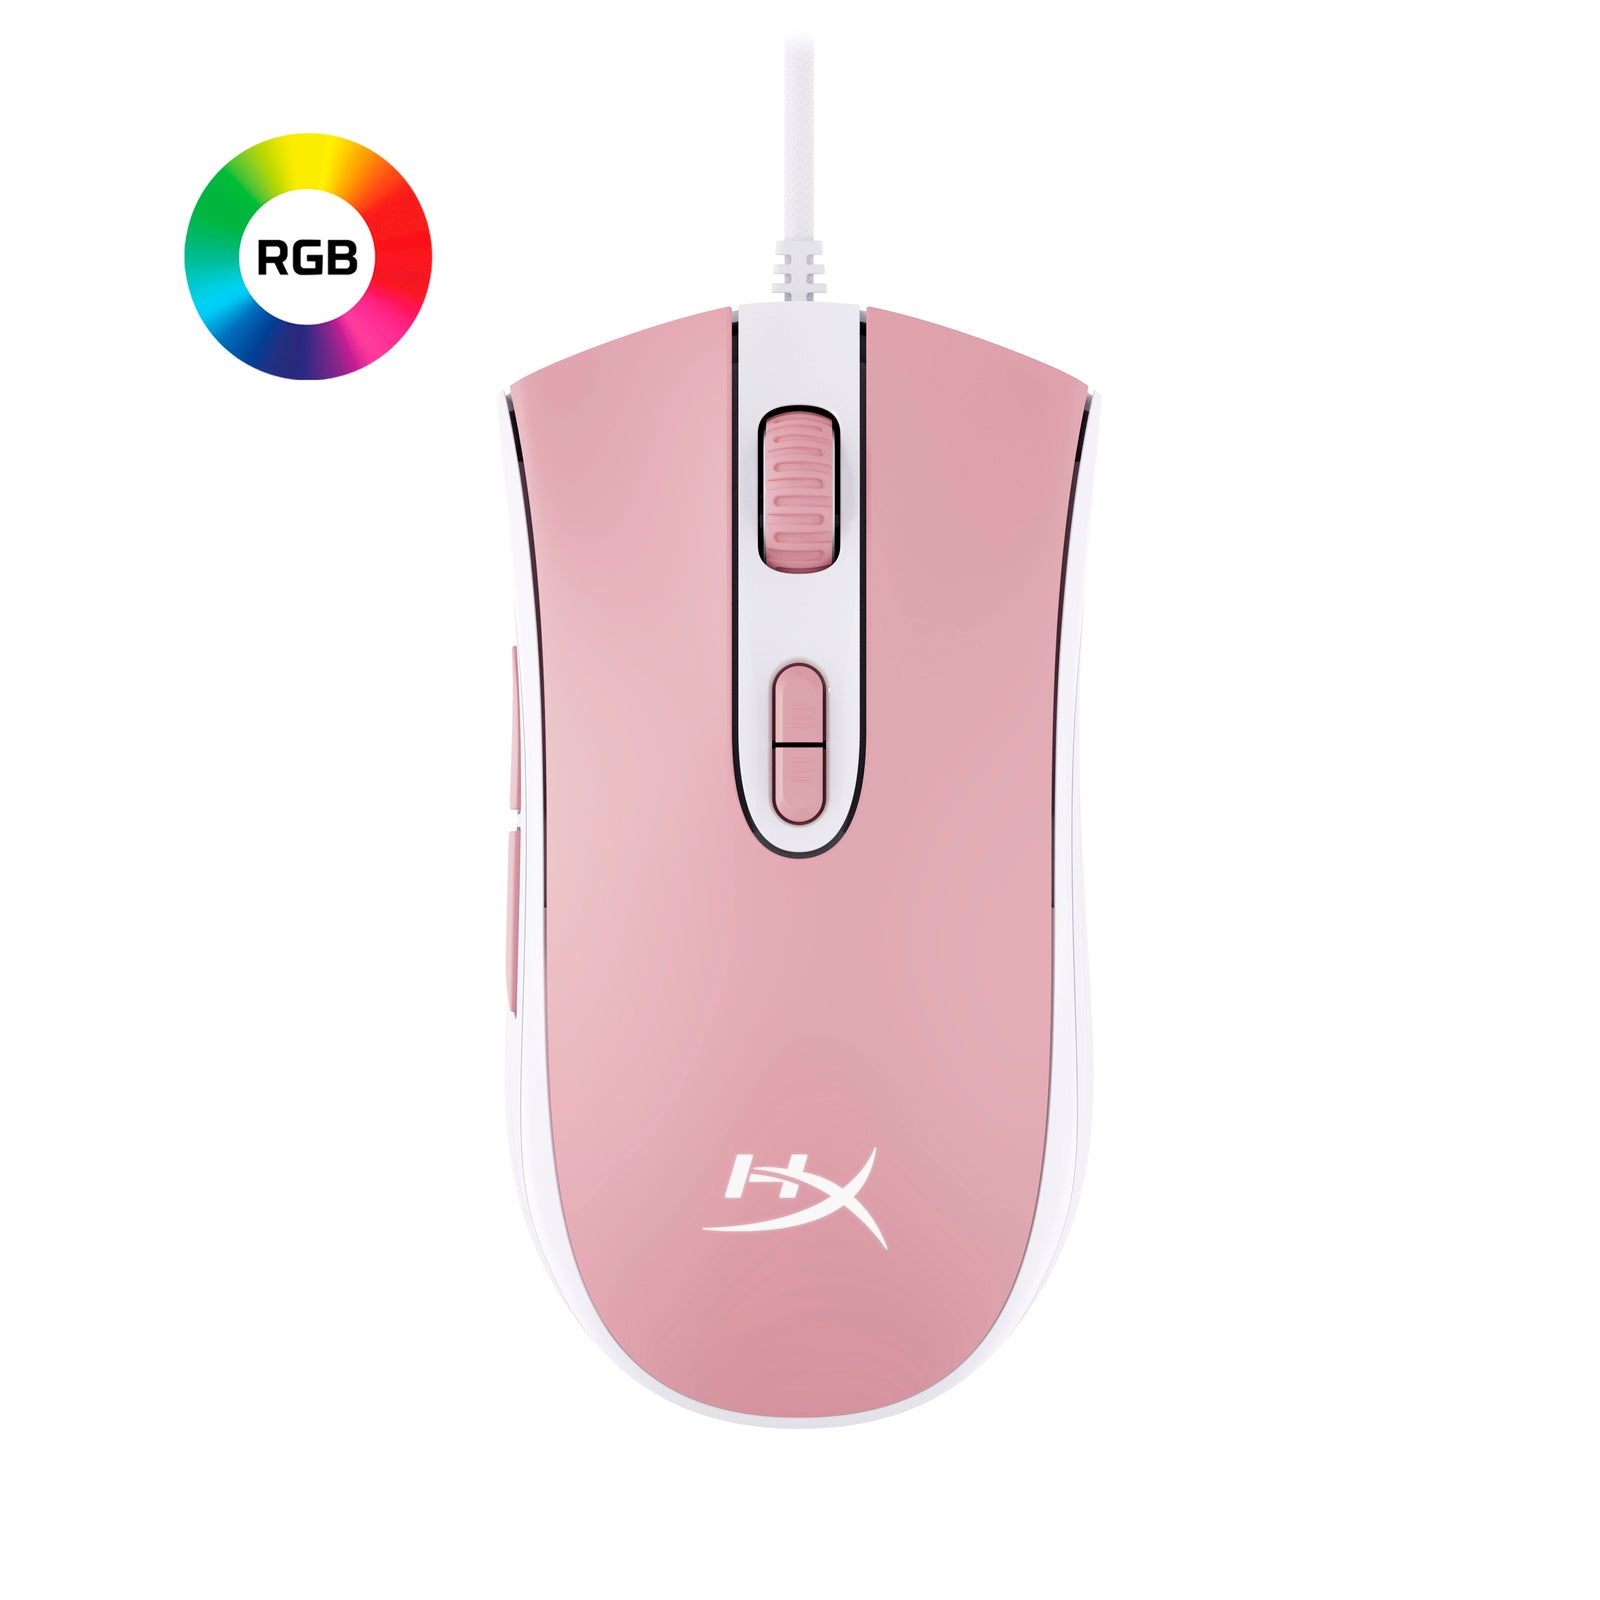 HyperX Pulsefire Core Pink Gaming Mouse Main Product view, showing RGB